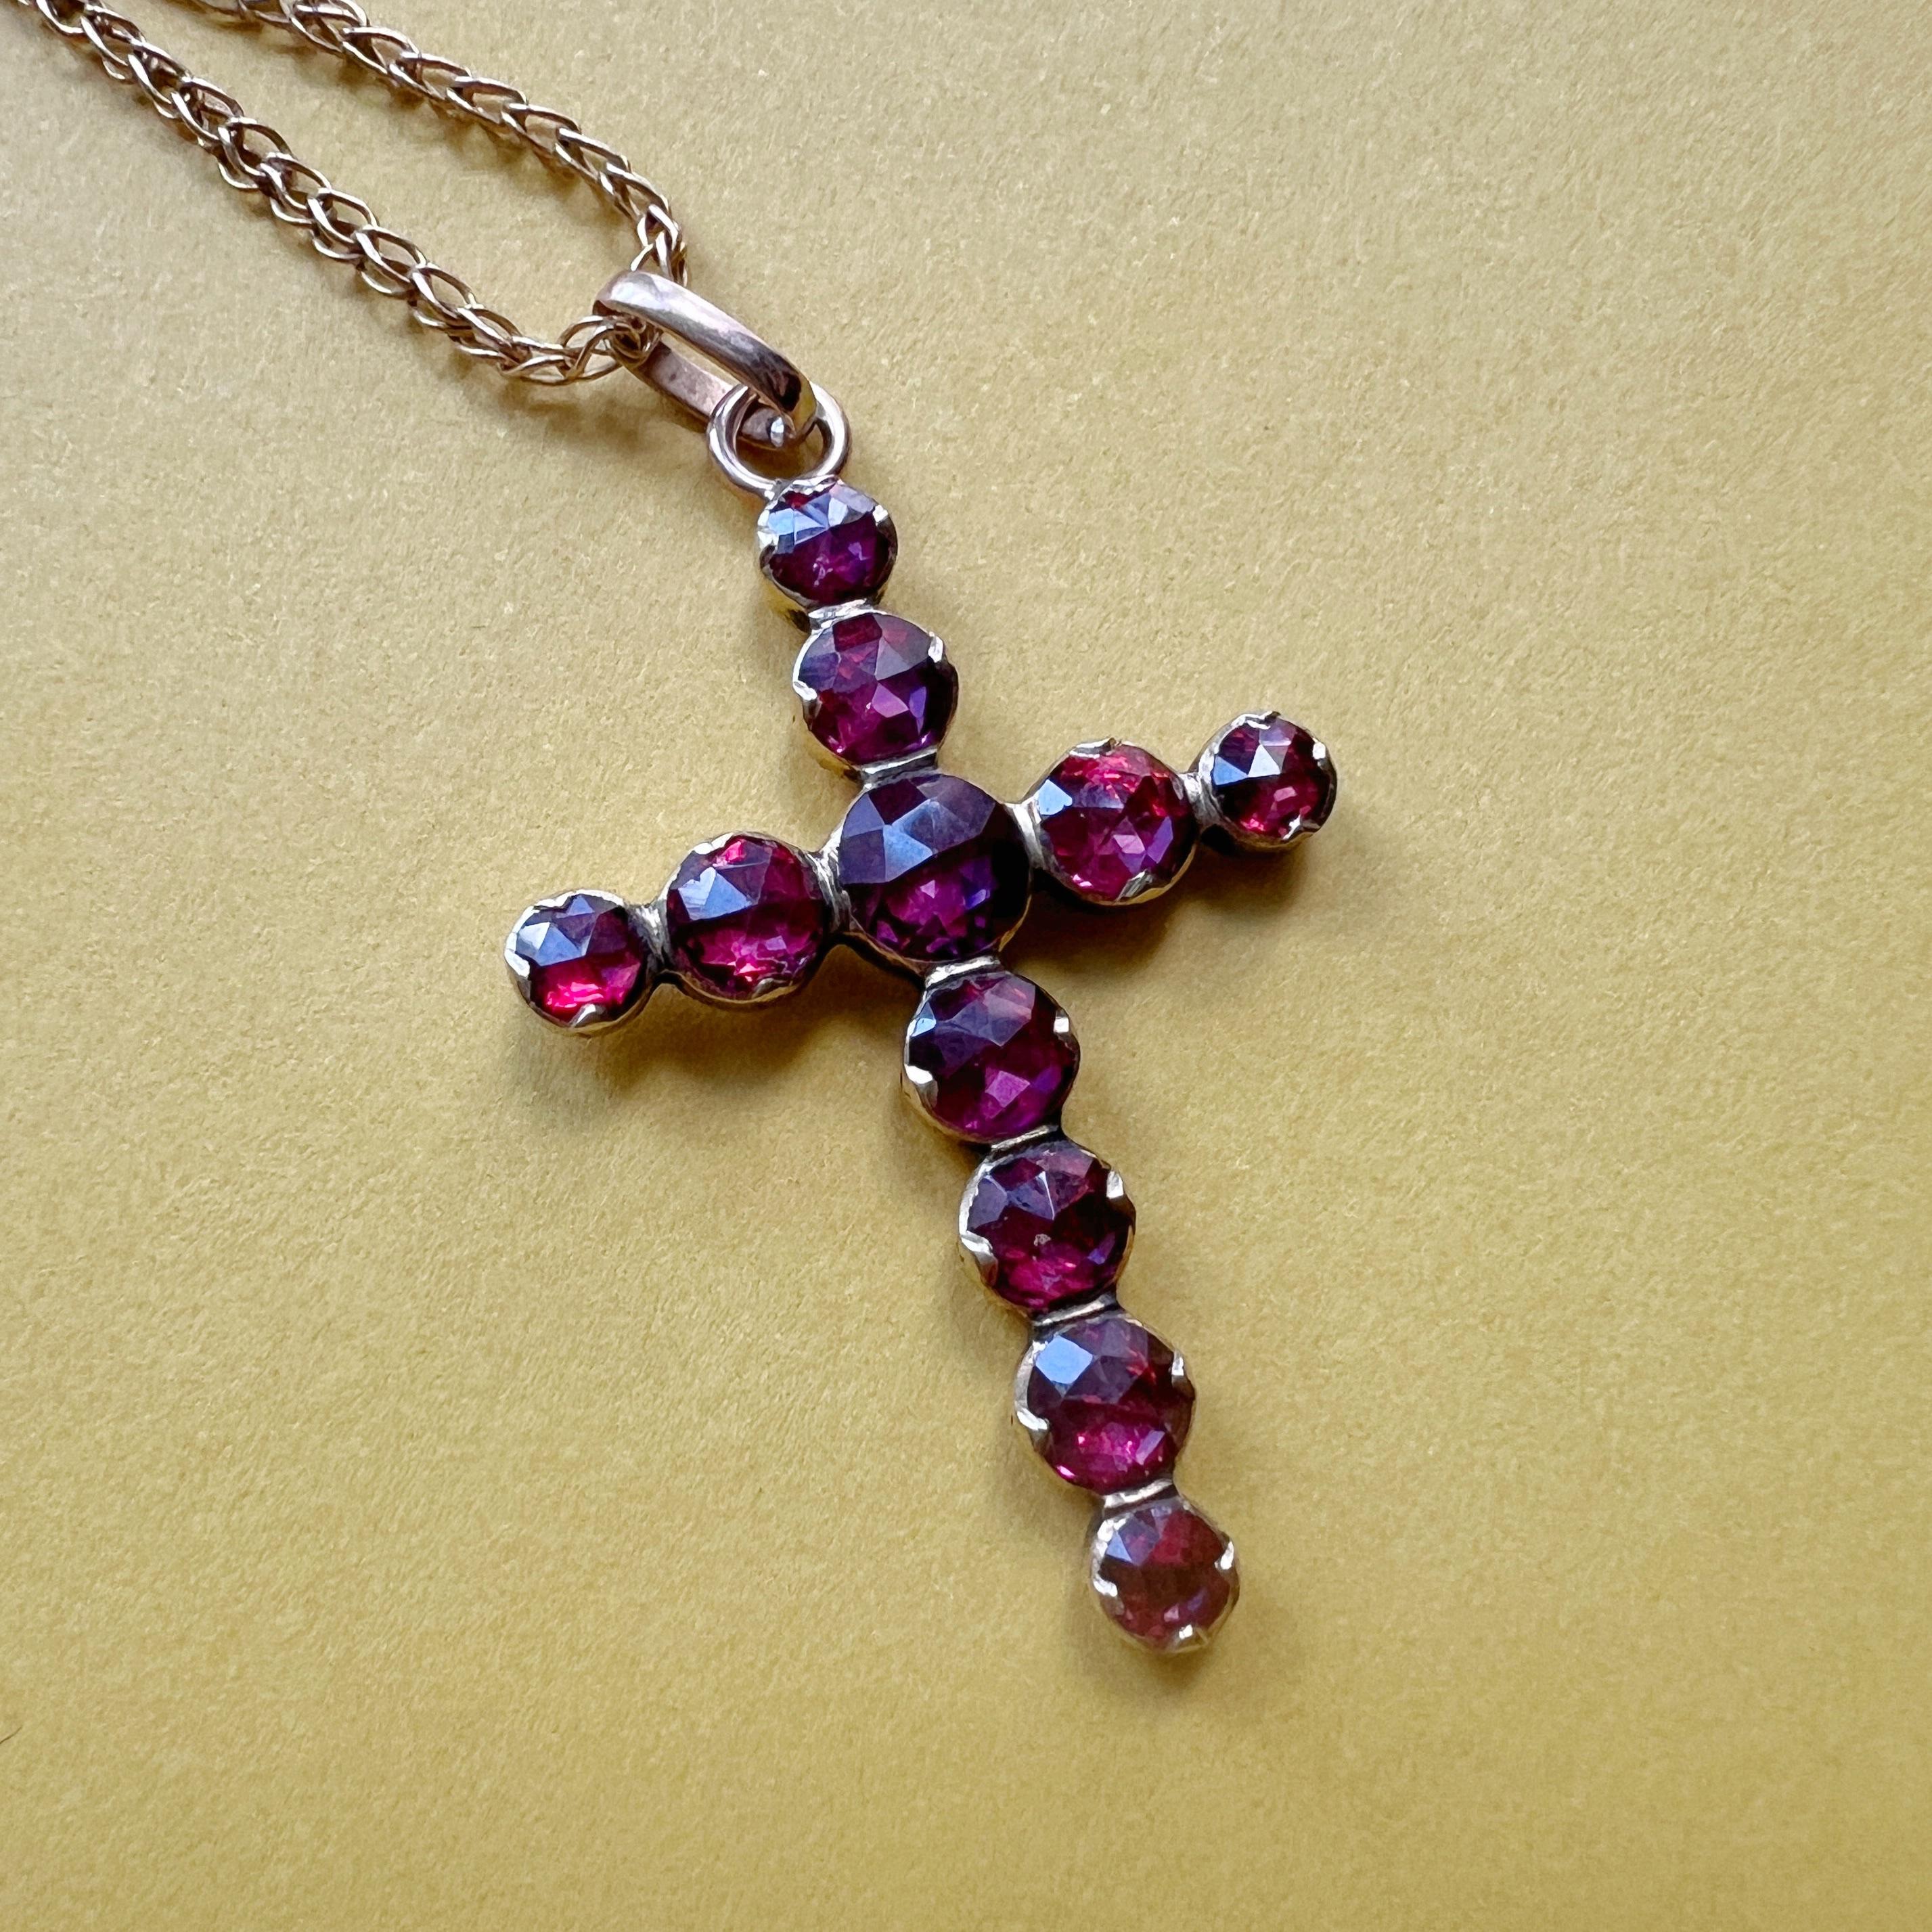 For sale a beautiful 19th century cross pendant made of 10 sparkling Perpignan garnets. The Perpignan garnets, rose cut and foiled back, are renowned for their deep, rich red hue. They lend an enchanting allure to the pendant, creating a stunning